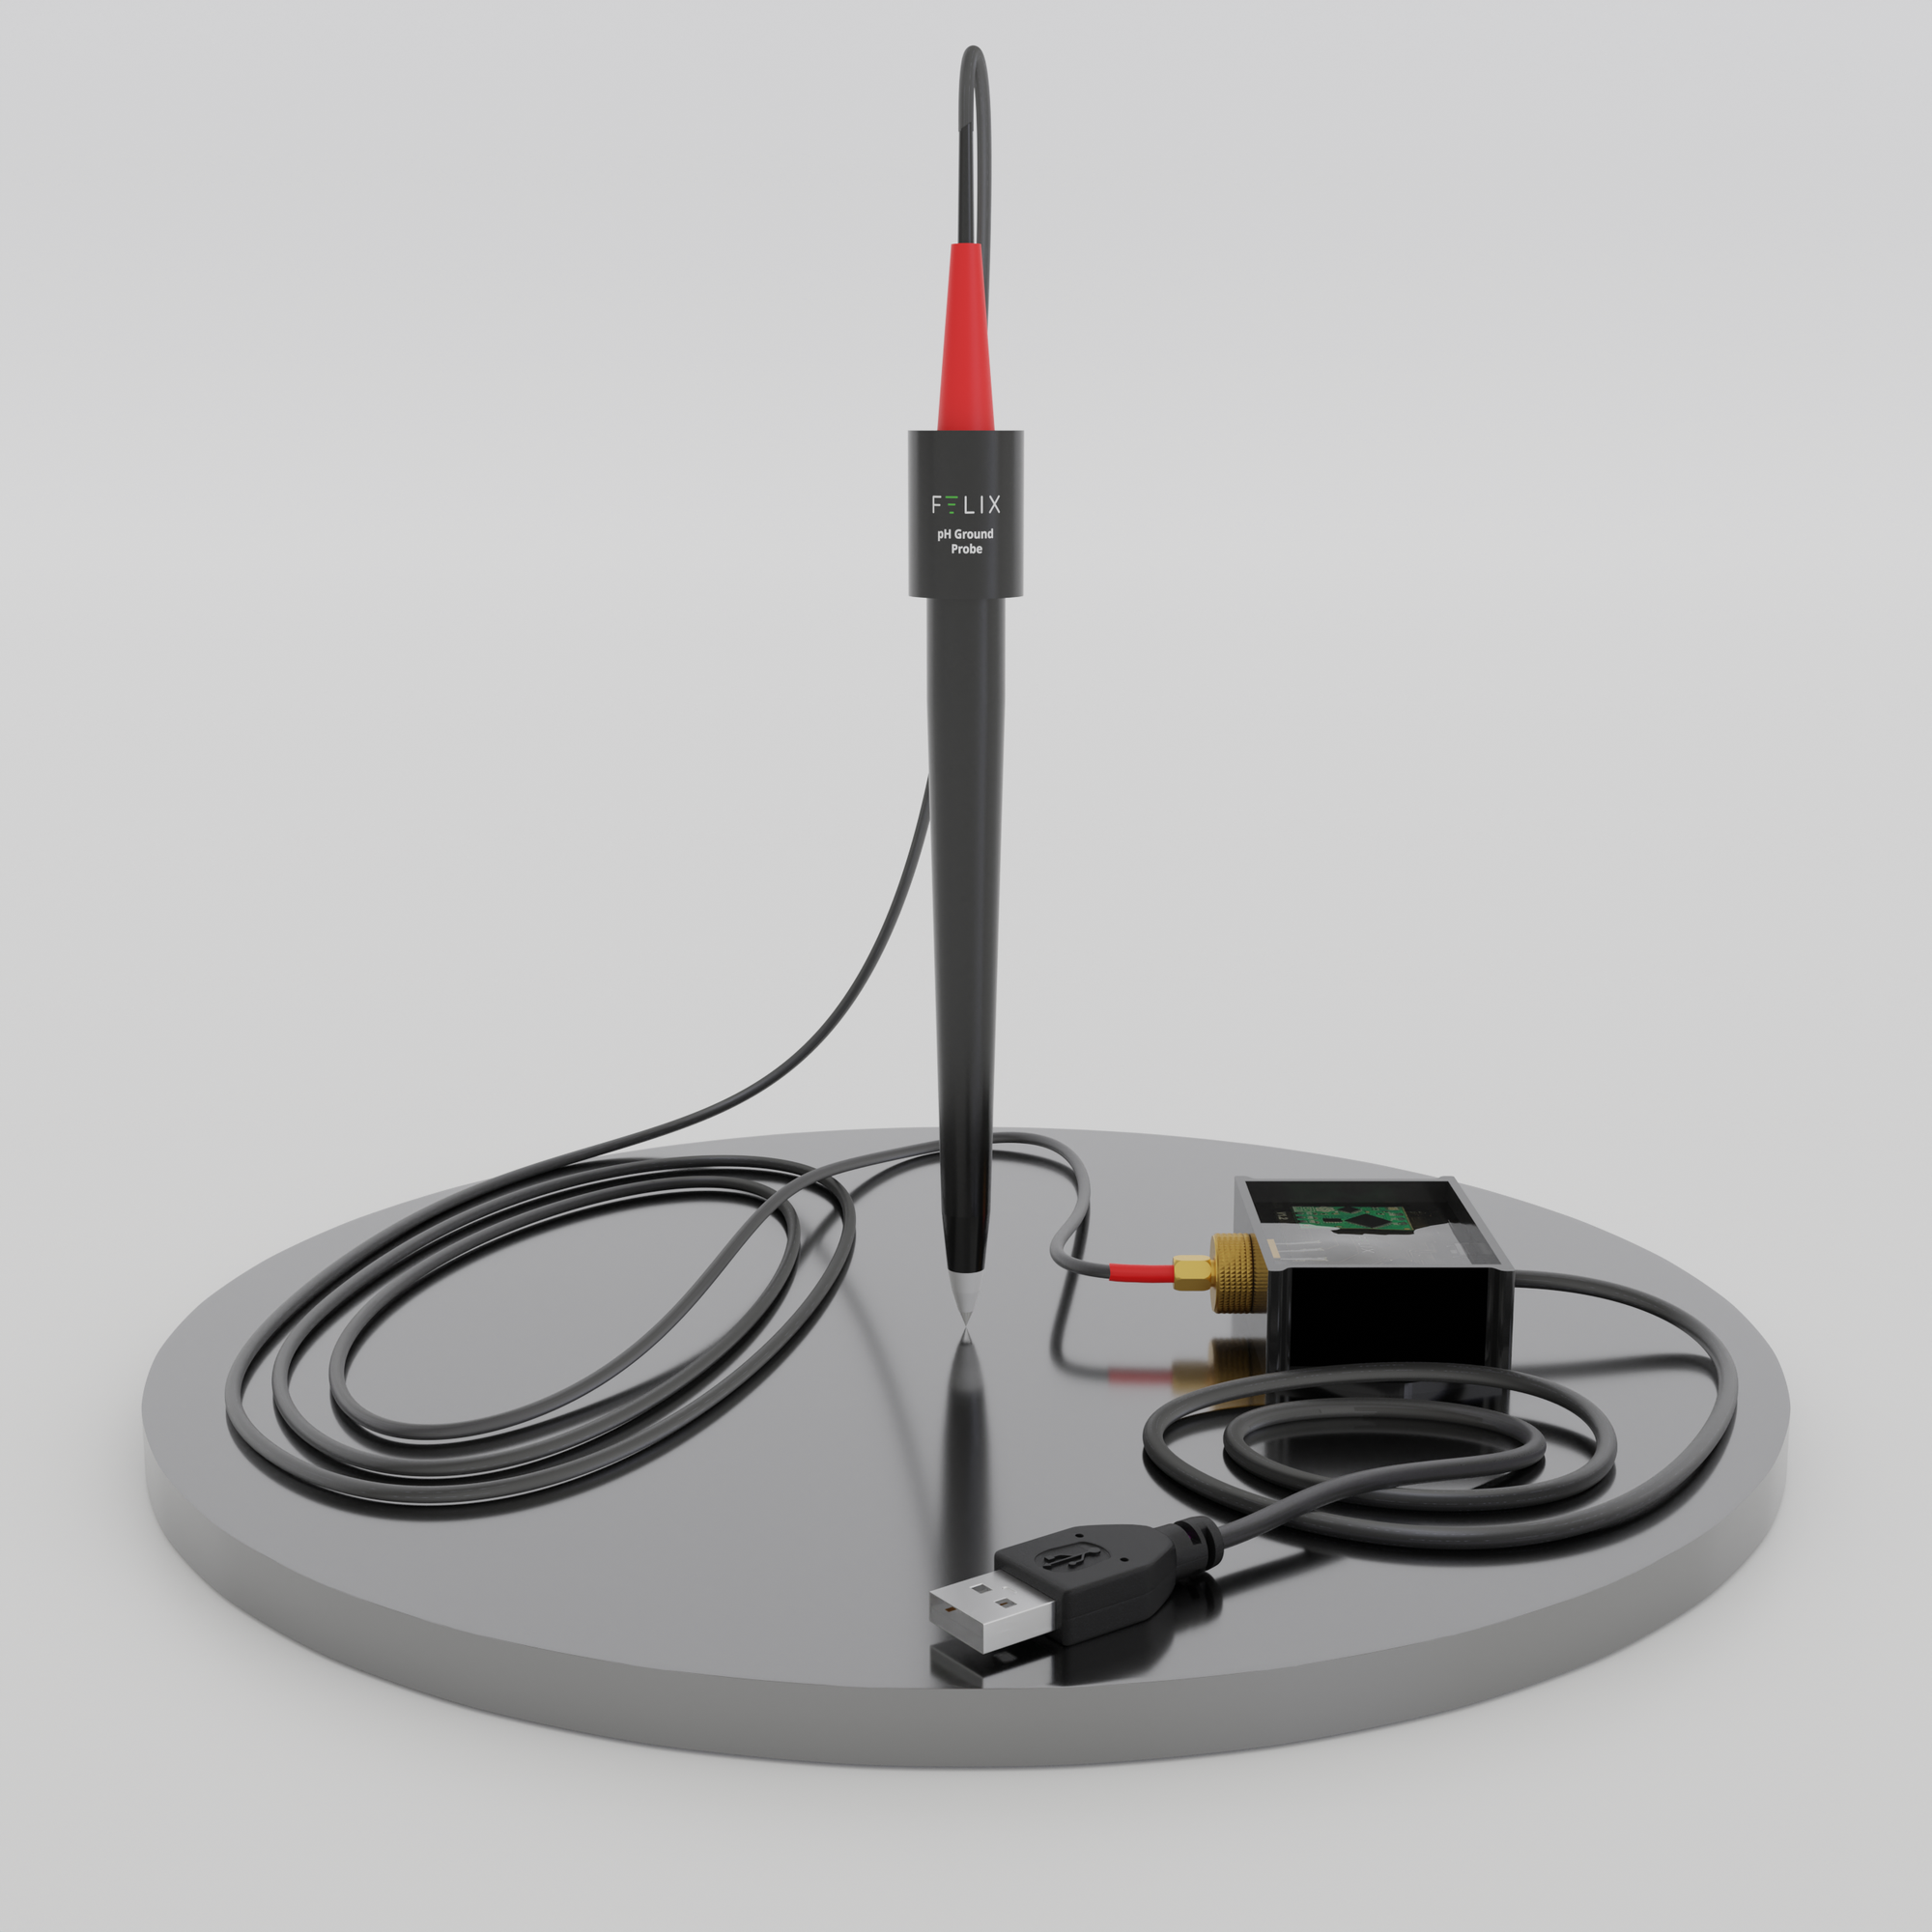 Felix Smart pH Ground Probe pictured standing up with view of USB connection hub and cable.